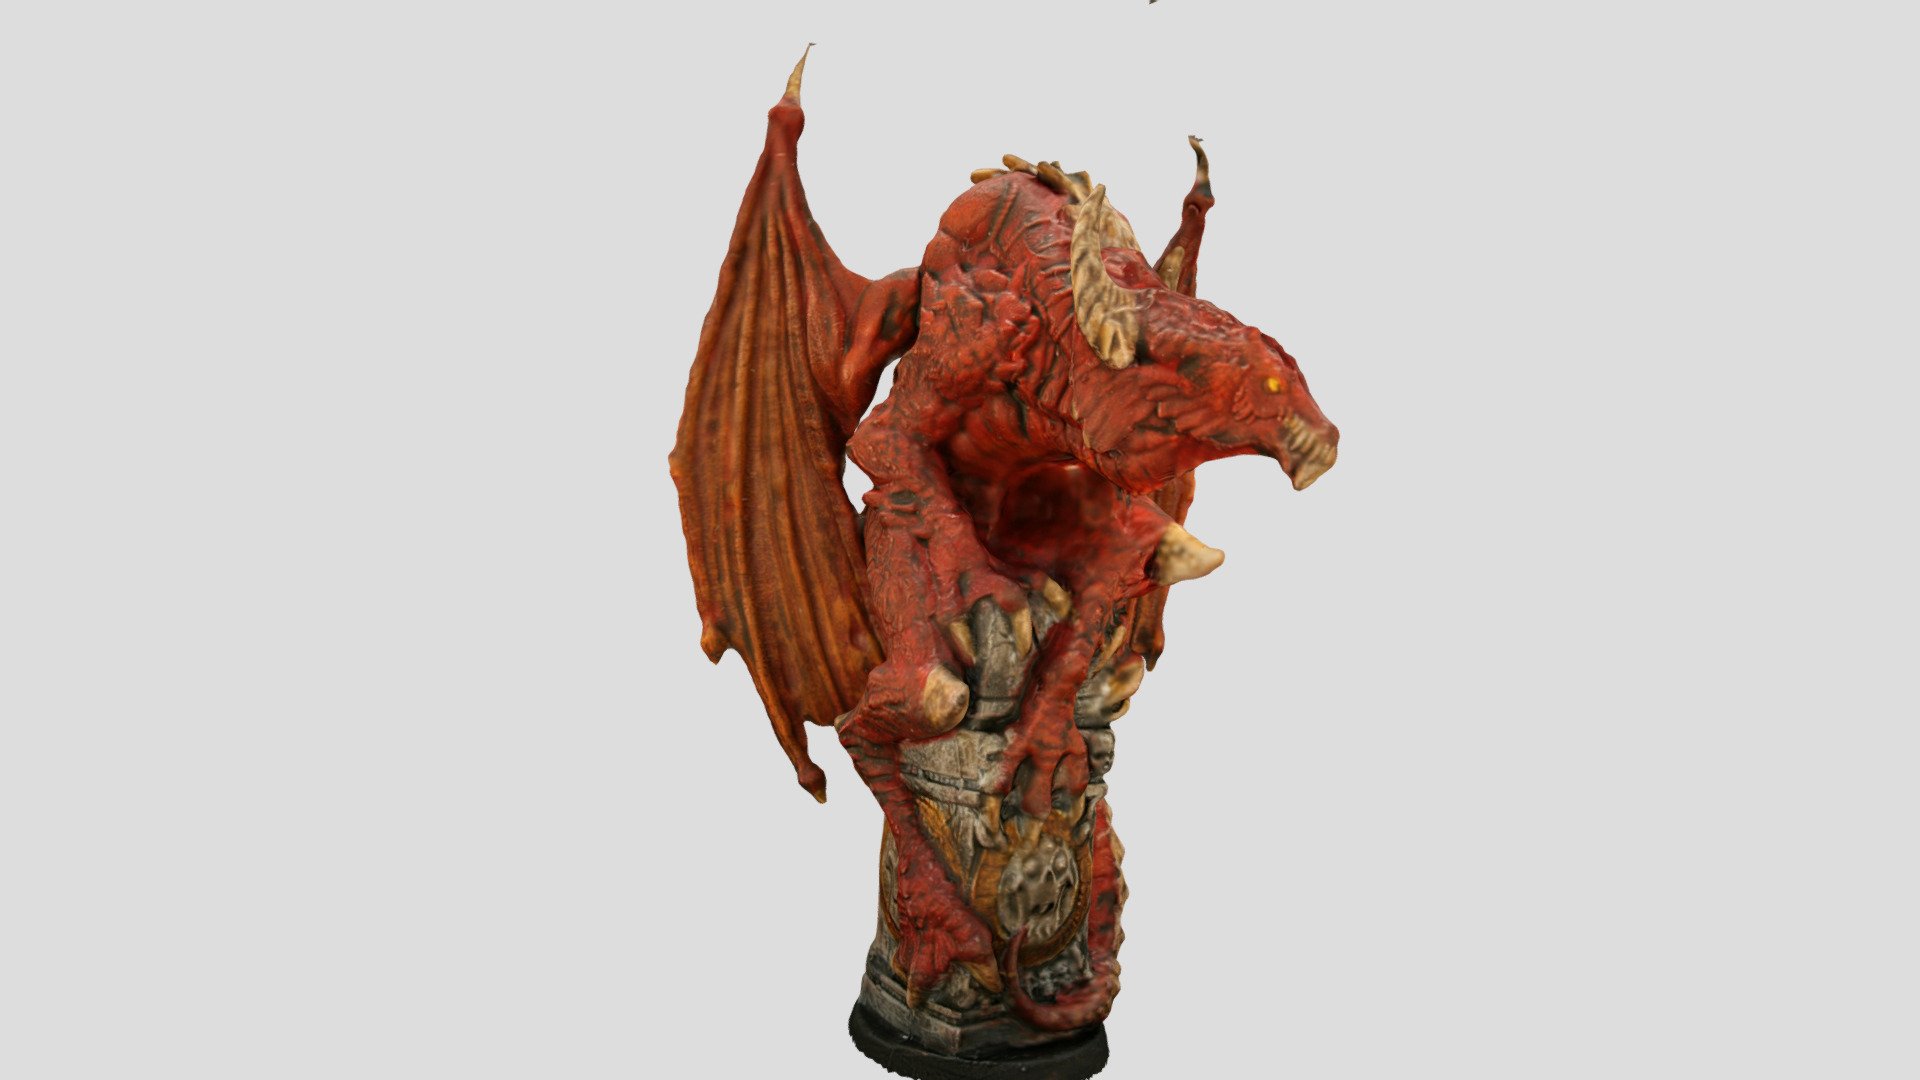 This model is based on the Crypt Dragon, Venim. It is from HeroQuest Mythic.

I did the photography and photogrammetry.
Painting was done by Pinnacle Painting Studio.

Using Chrome browser is better than Modzilla Firefox here on SKETCHFAB - Smaug - Duke Blitzein - Buy Royalty Free 3D model by Chad "Duke Blitzein" C (@chad_c) 3d model